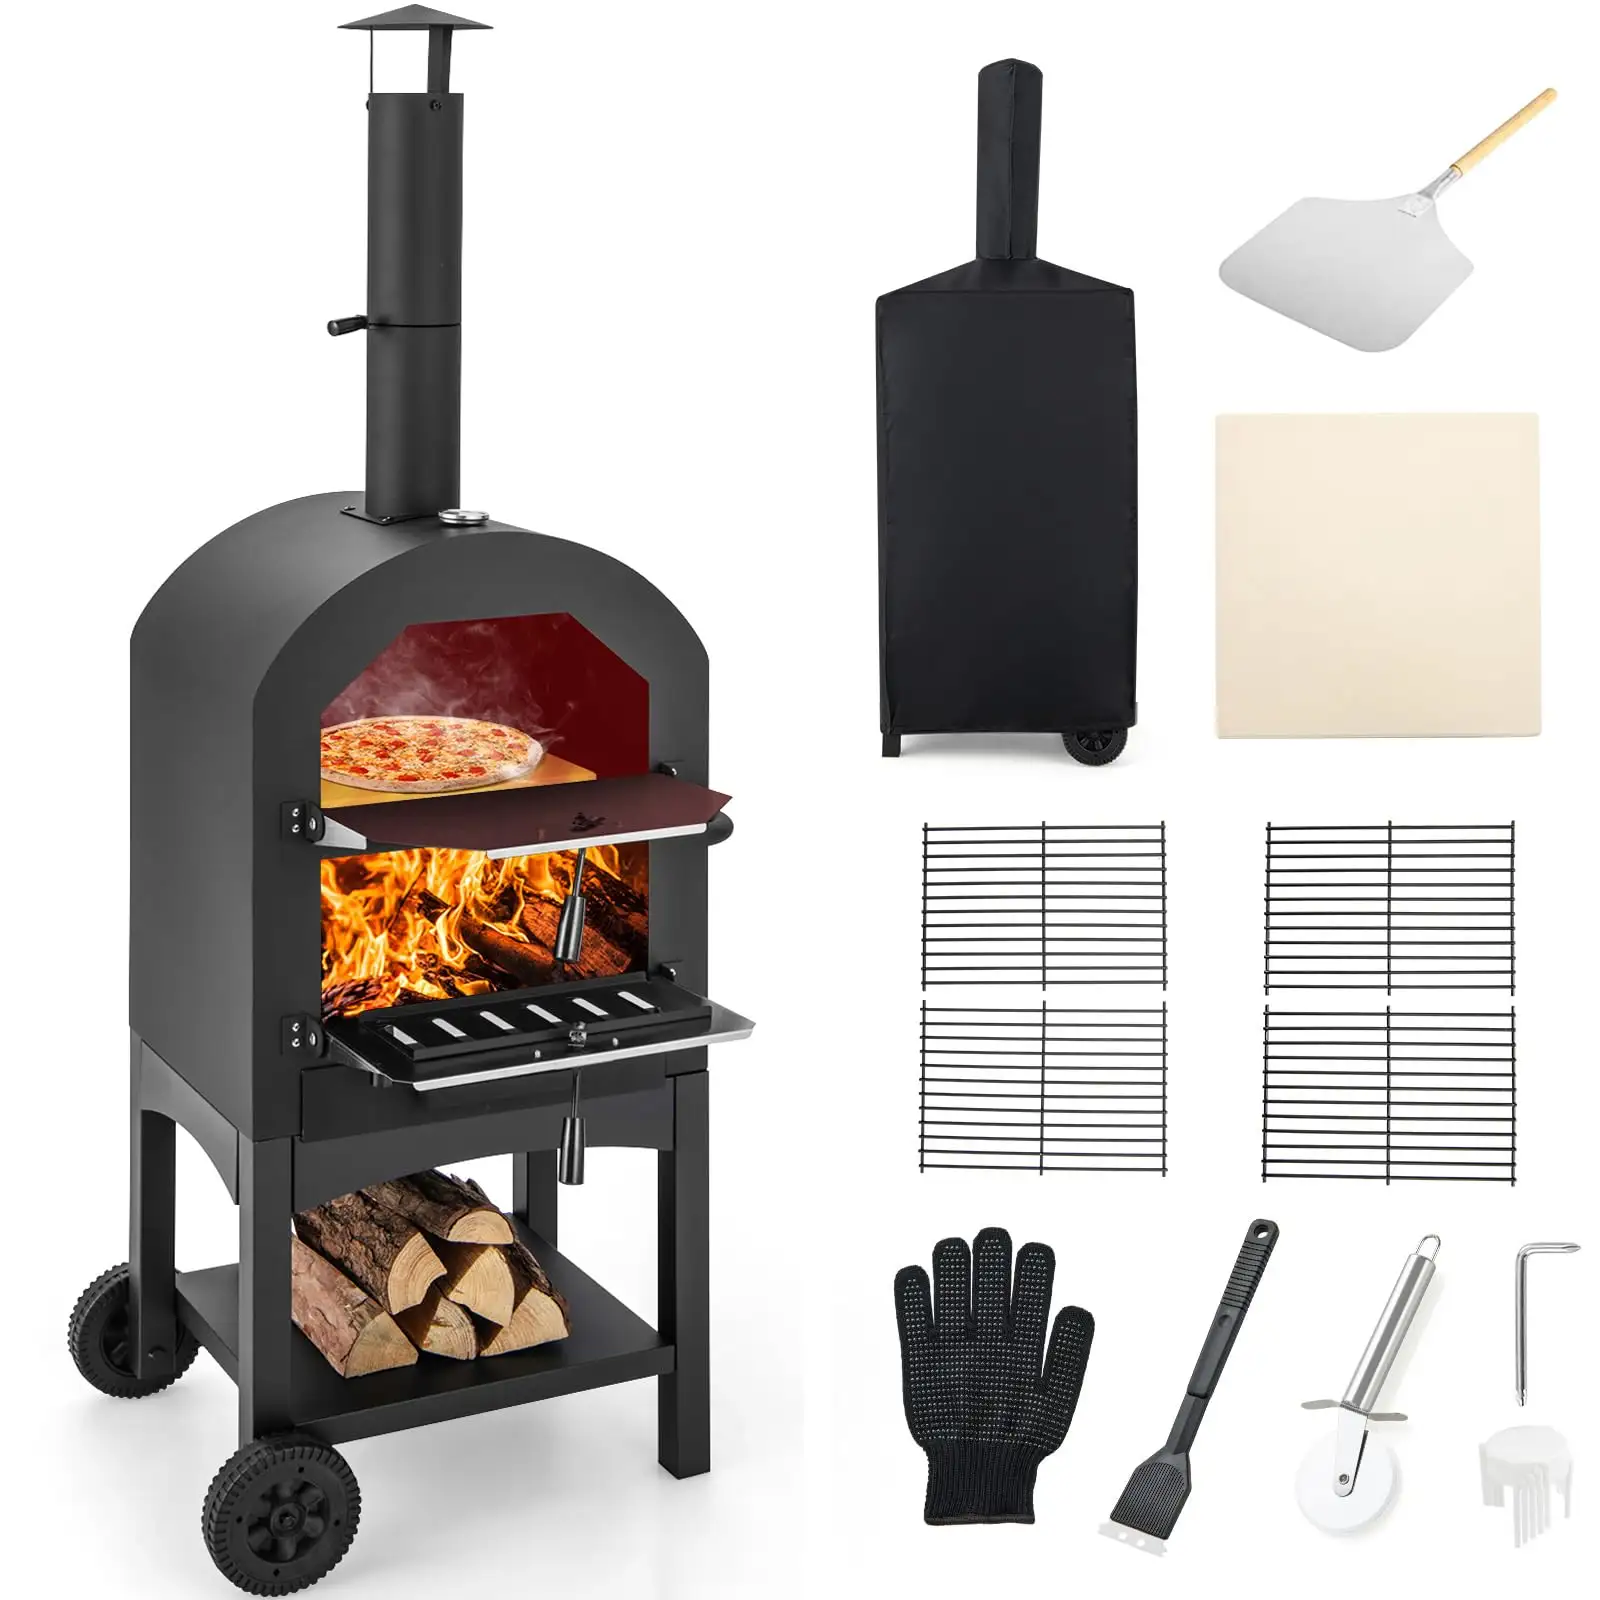 Outdoor Forno Per Pizze Houtgestookte Houtskool Pizza Maker Trolly Grill Broodroosters Hout Pizza Oven Met Pizza Steen Schil Covers